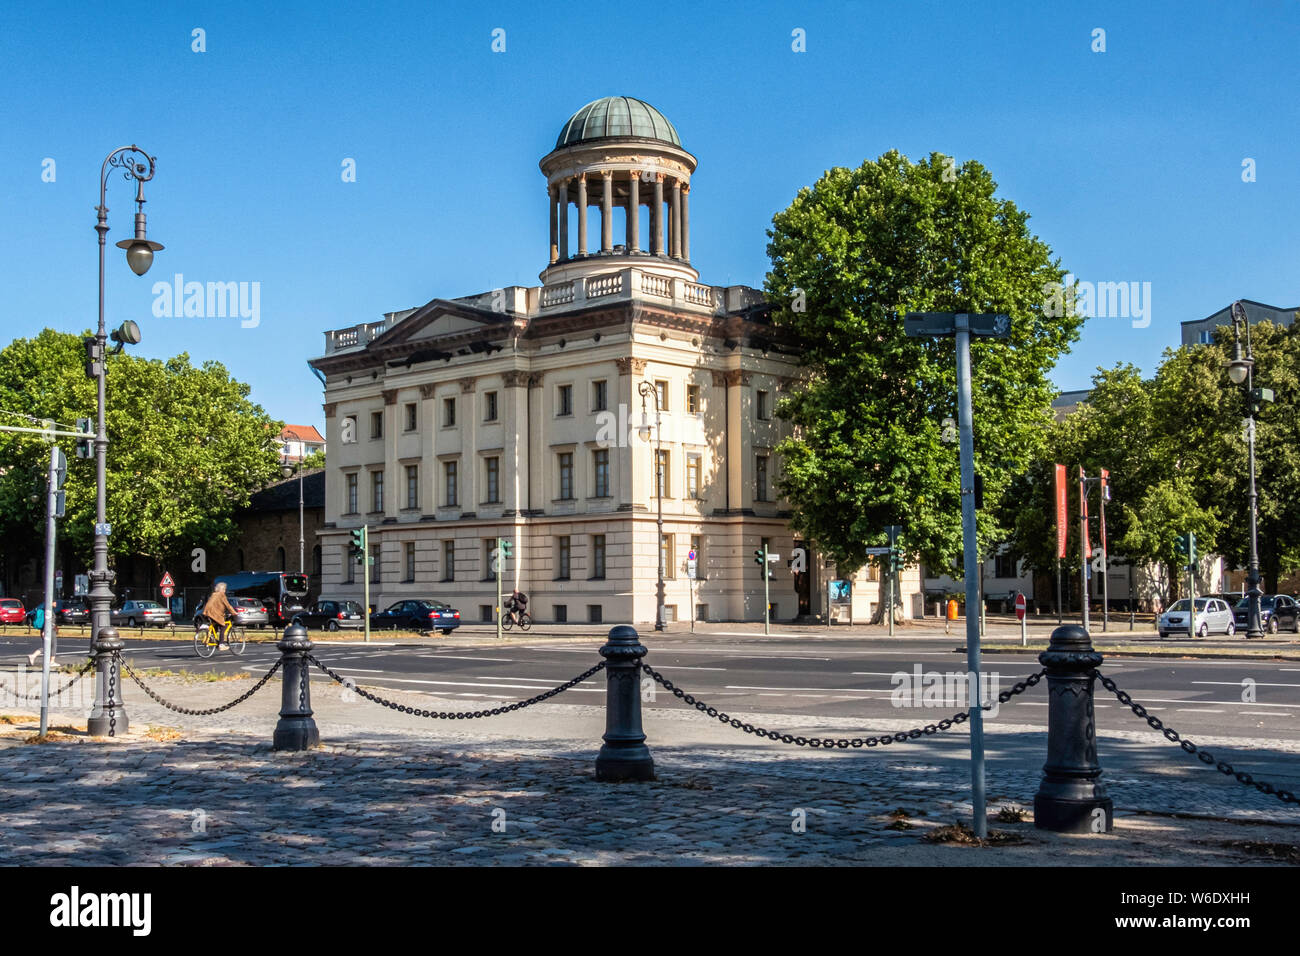 The Sammlung Scharf-Gerstenberg art collection is housed in a listed Neo-classical style building by architect Friedrich August Stüler in Berlin Stock Photo